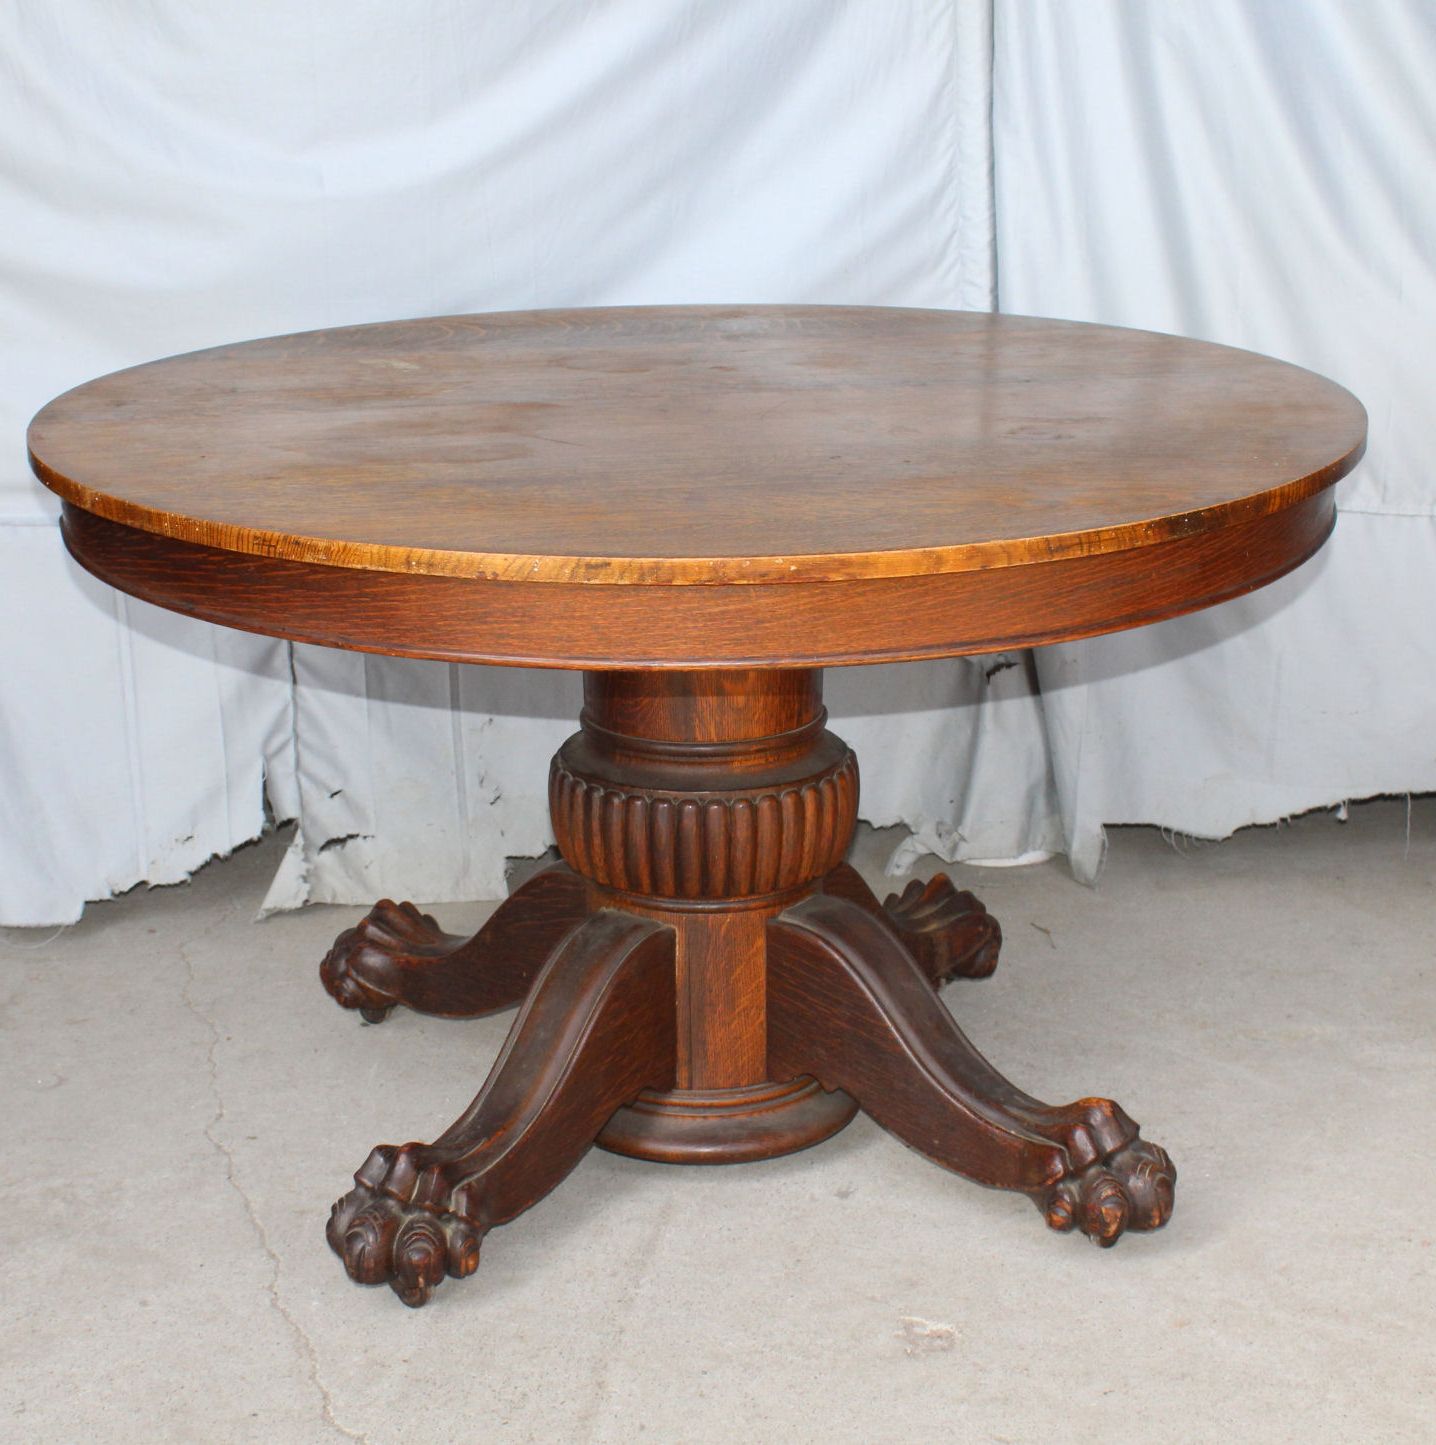 Antique Round Oak Dining Table Intended For Most Popular Vintage Brown Round Dining Tables (View 5 of 20)